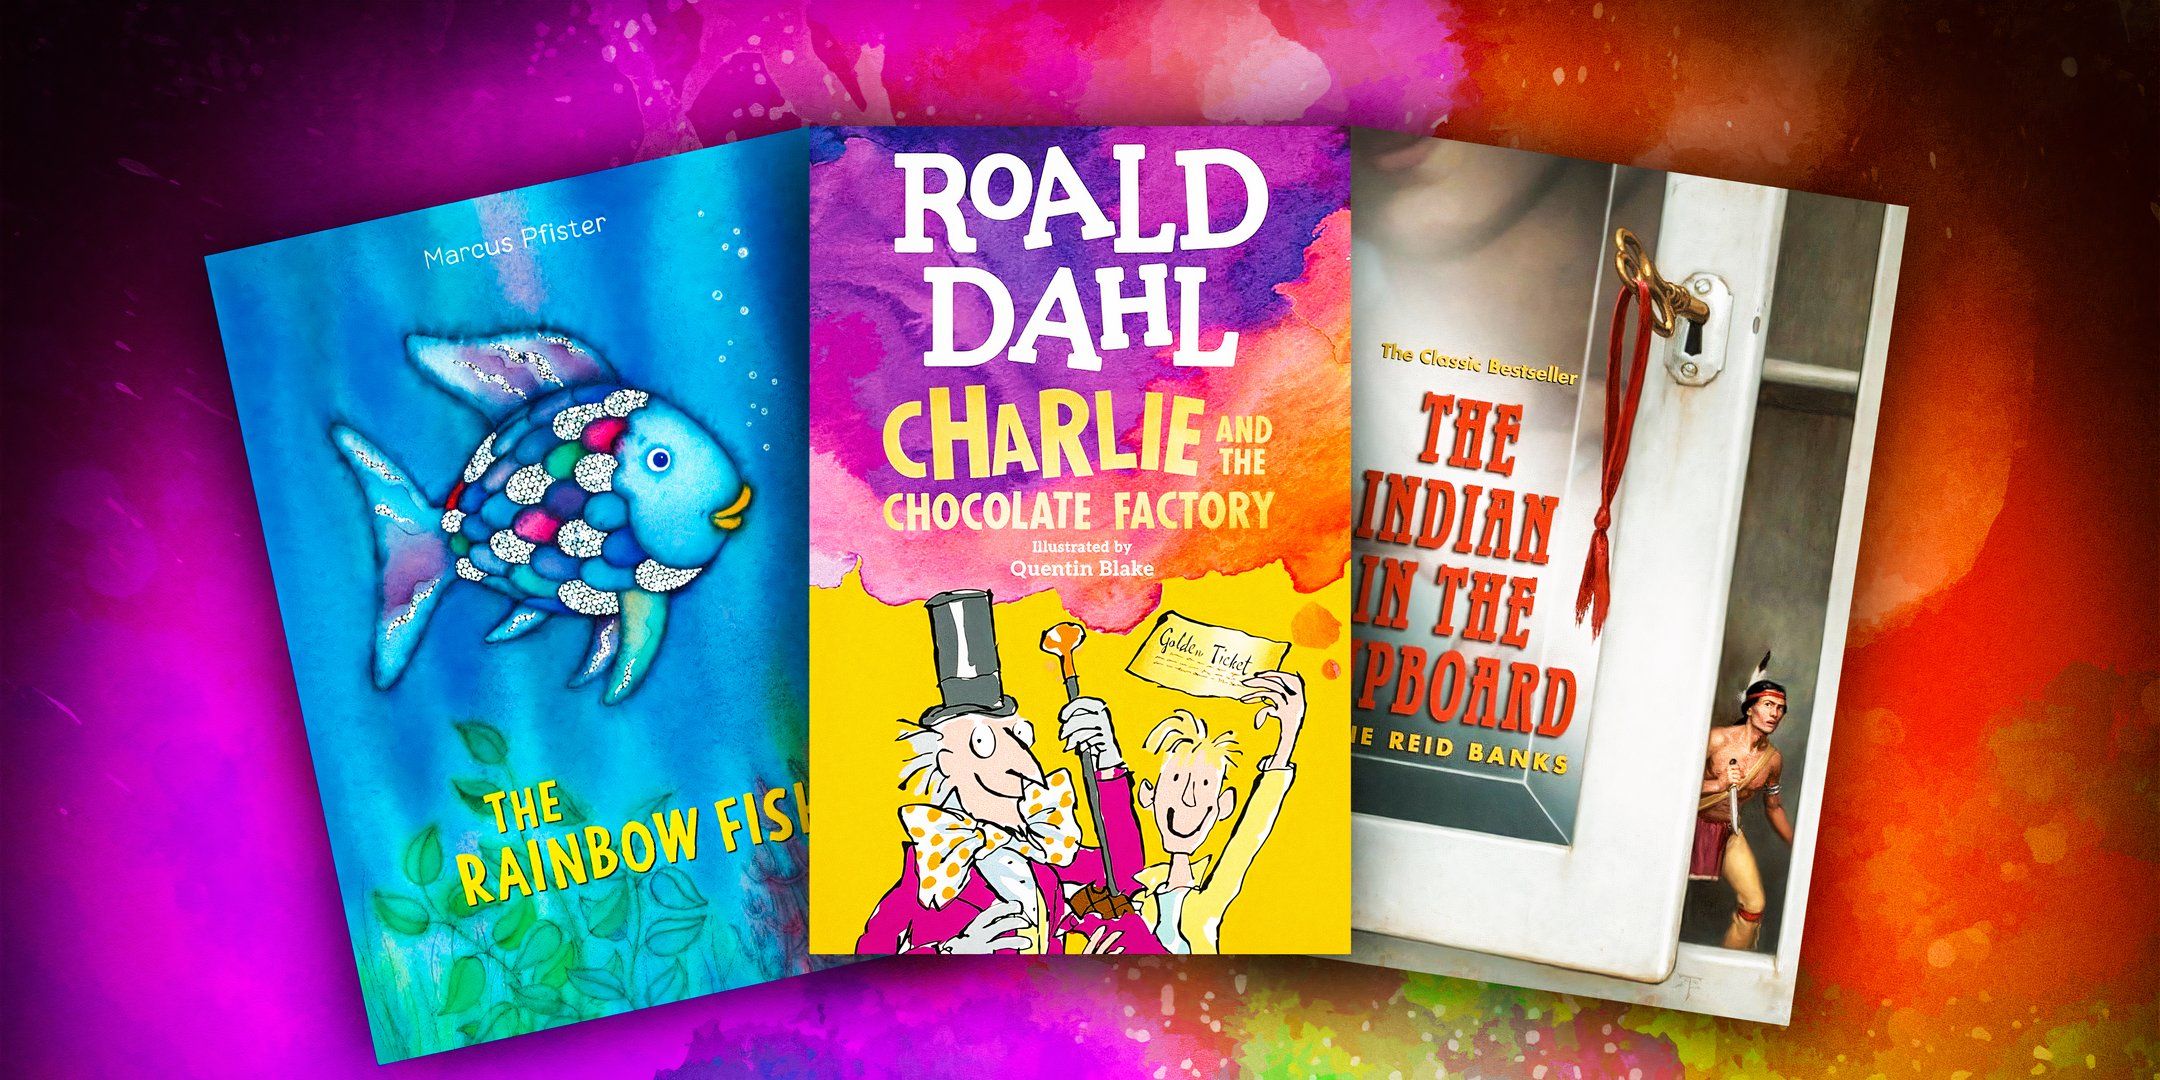 Book-Imagery-from-The-Rainbow-Fish-By-Marcus-Pfister-Charlie-and-the-Chocolate-Factory-Republished-By-Roald-Dahl-and-The-Indian-In-The-Cupboard-By-Lynne-Reid-Banks-Book